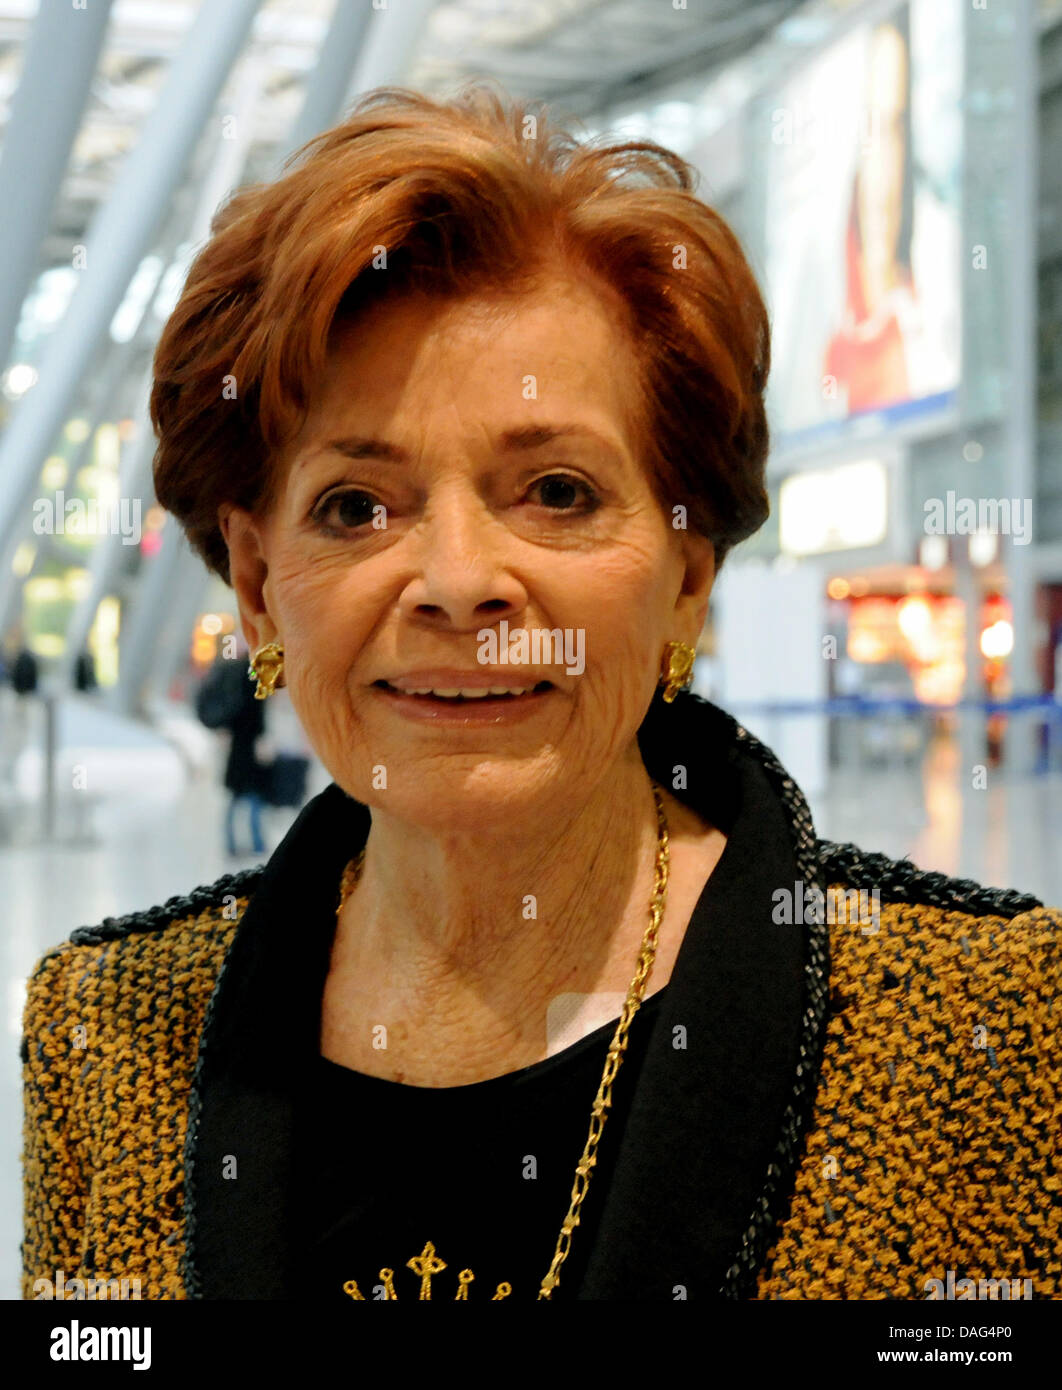 Swiss singer Lys Assia (87), the first Grand Prix winner from 1956, poses with flowers at the airport in Duesseldorf, Germany, 18 March 2011. Assia talked about her Grand Prix de la Eurovision song contest experience during a press conference with the mayor of Duesseldorf, Elbers. Photo: Horst Ossinger Stock Photo